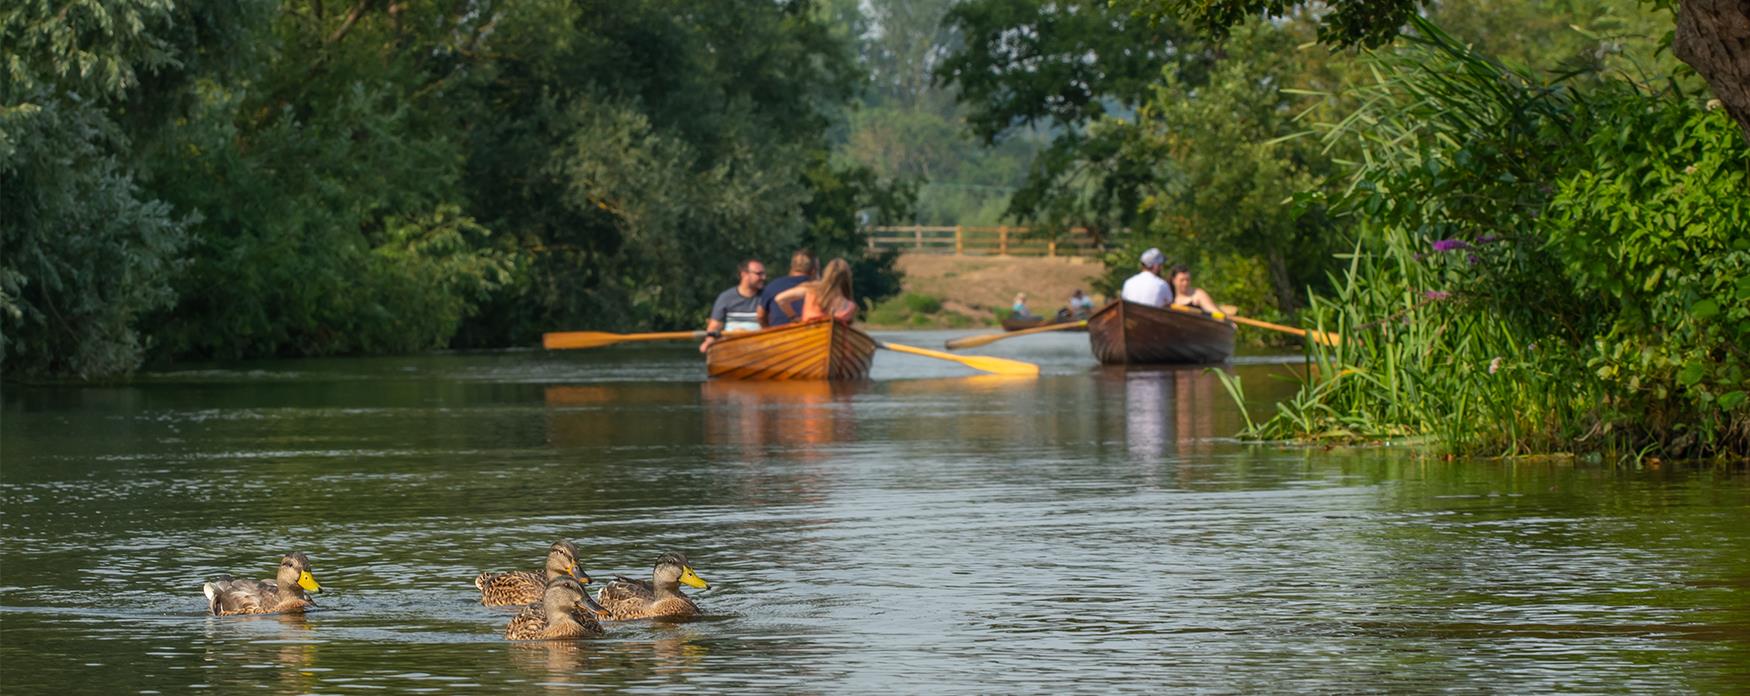 Dedham rowing on River Stour